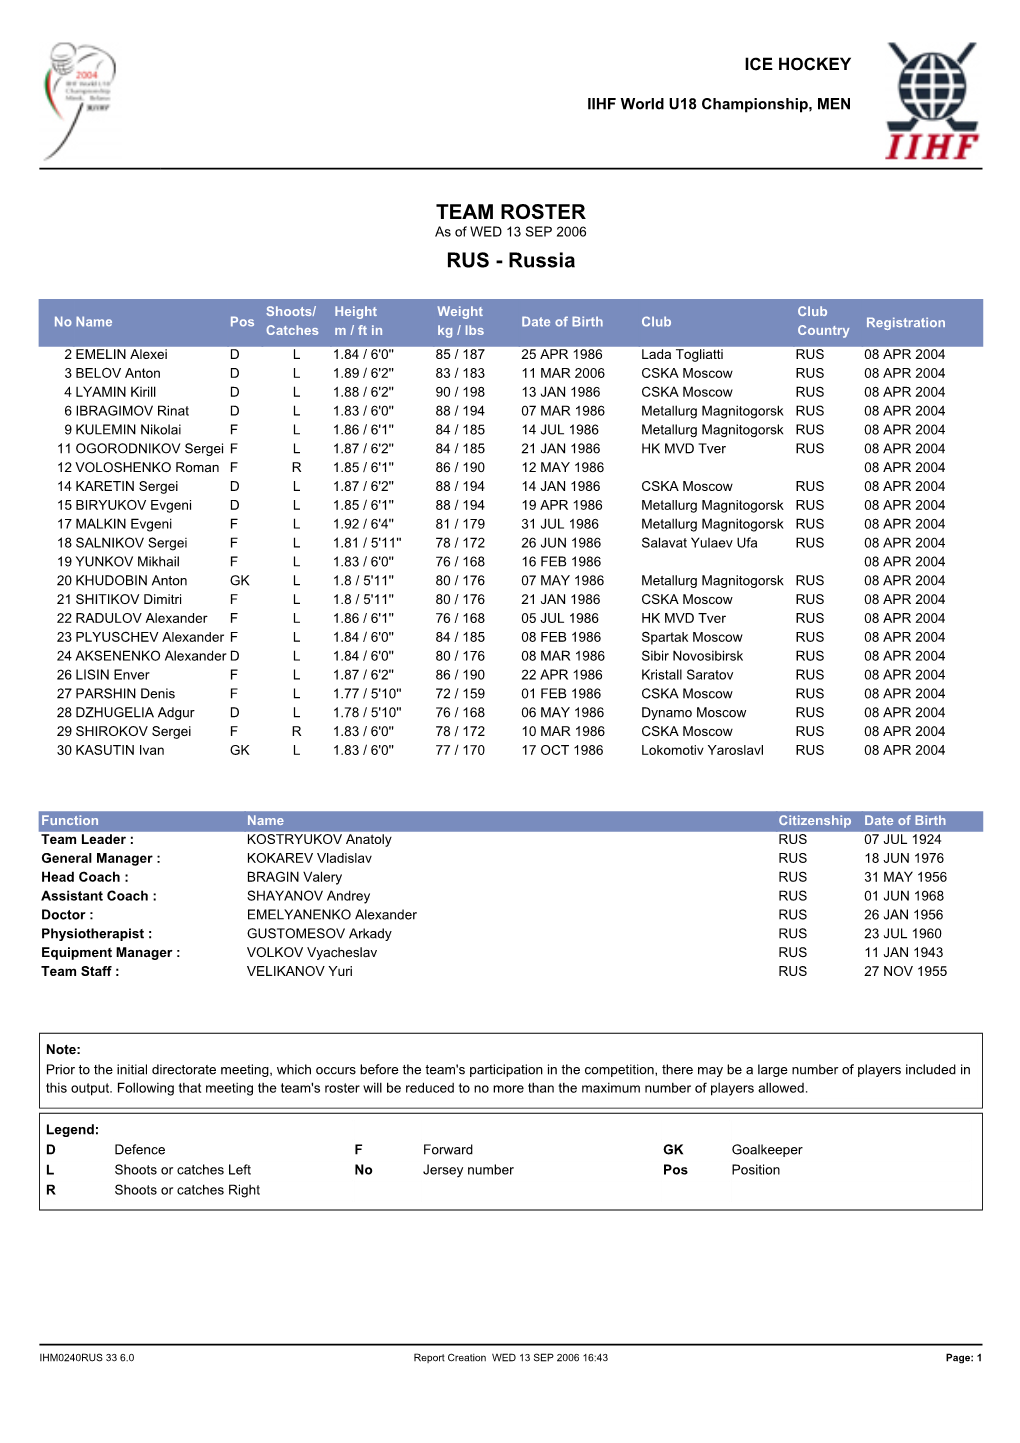 TEAM ROSTER As of WED 13 SEP 2006 RUS - Russia